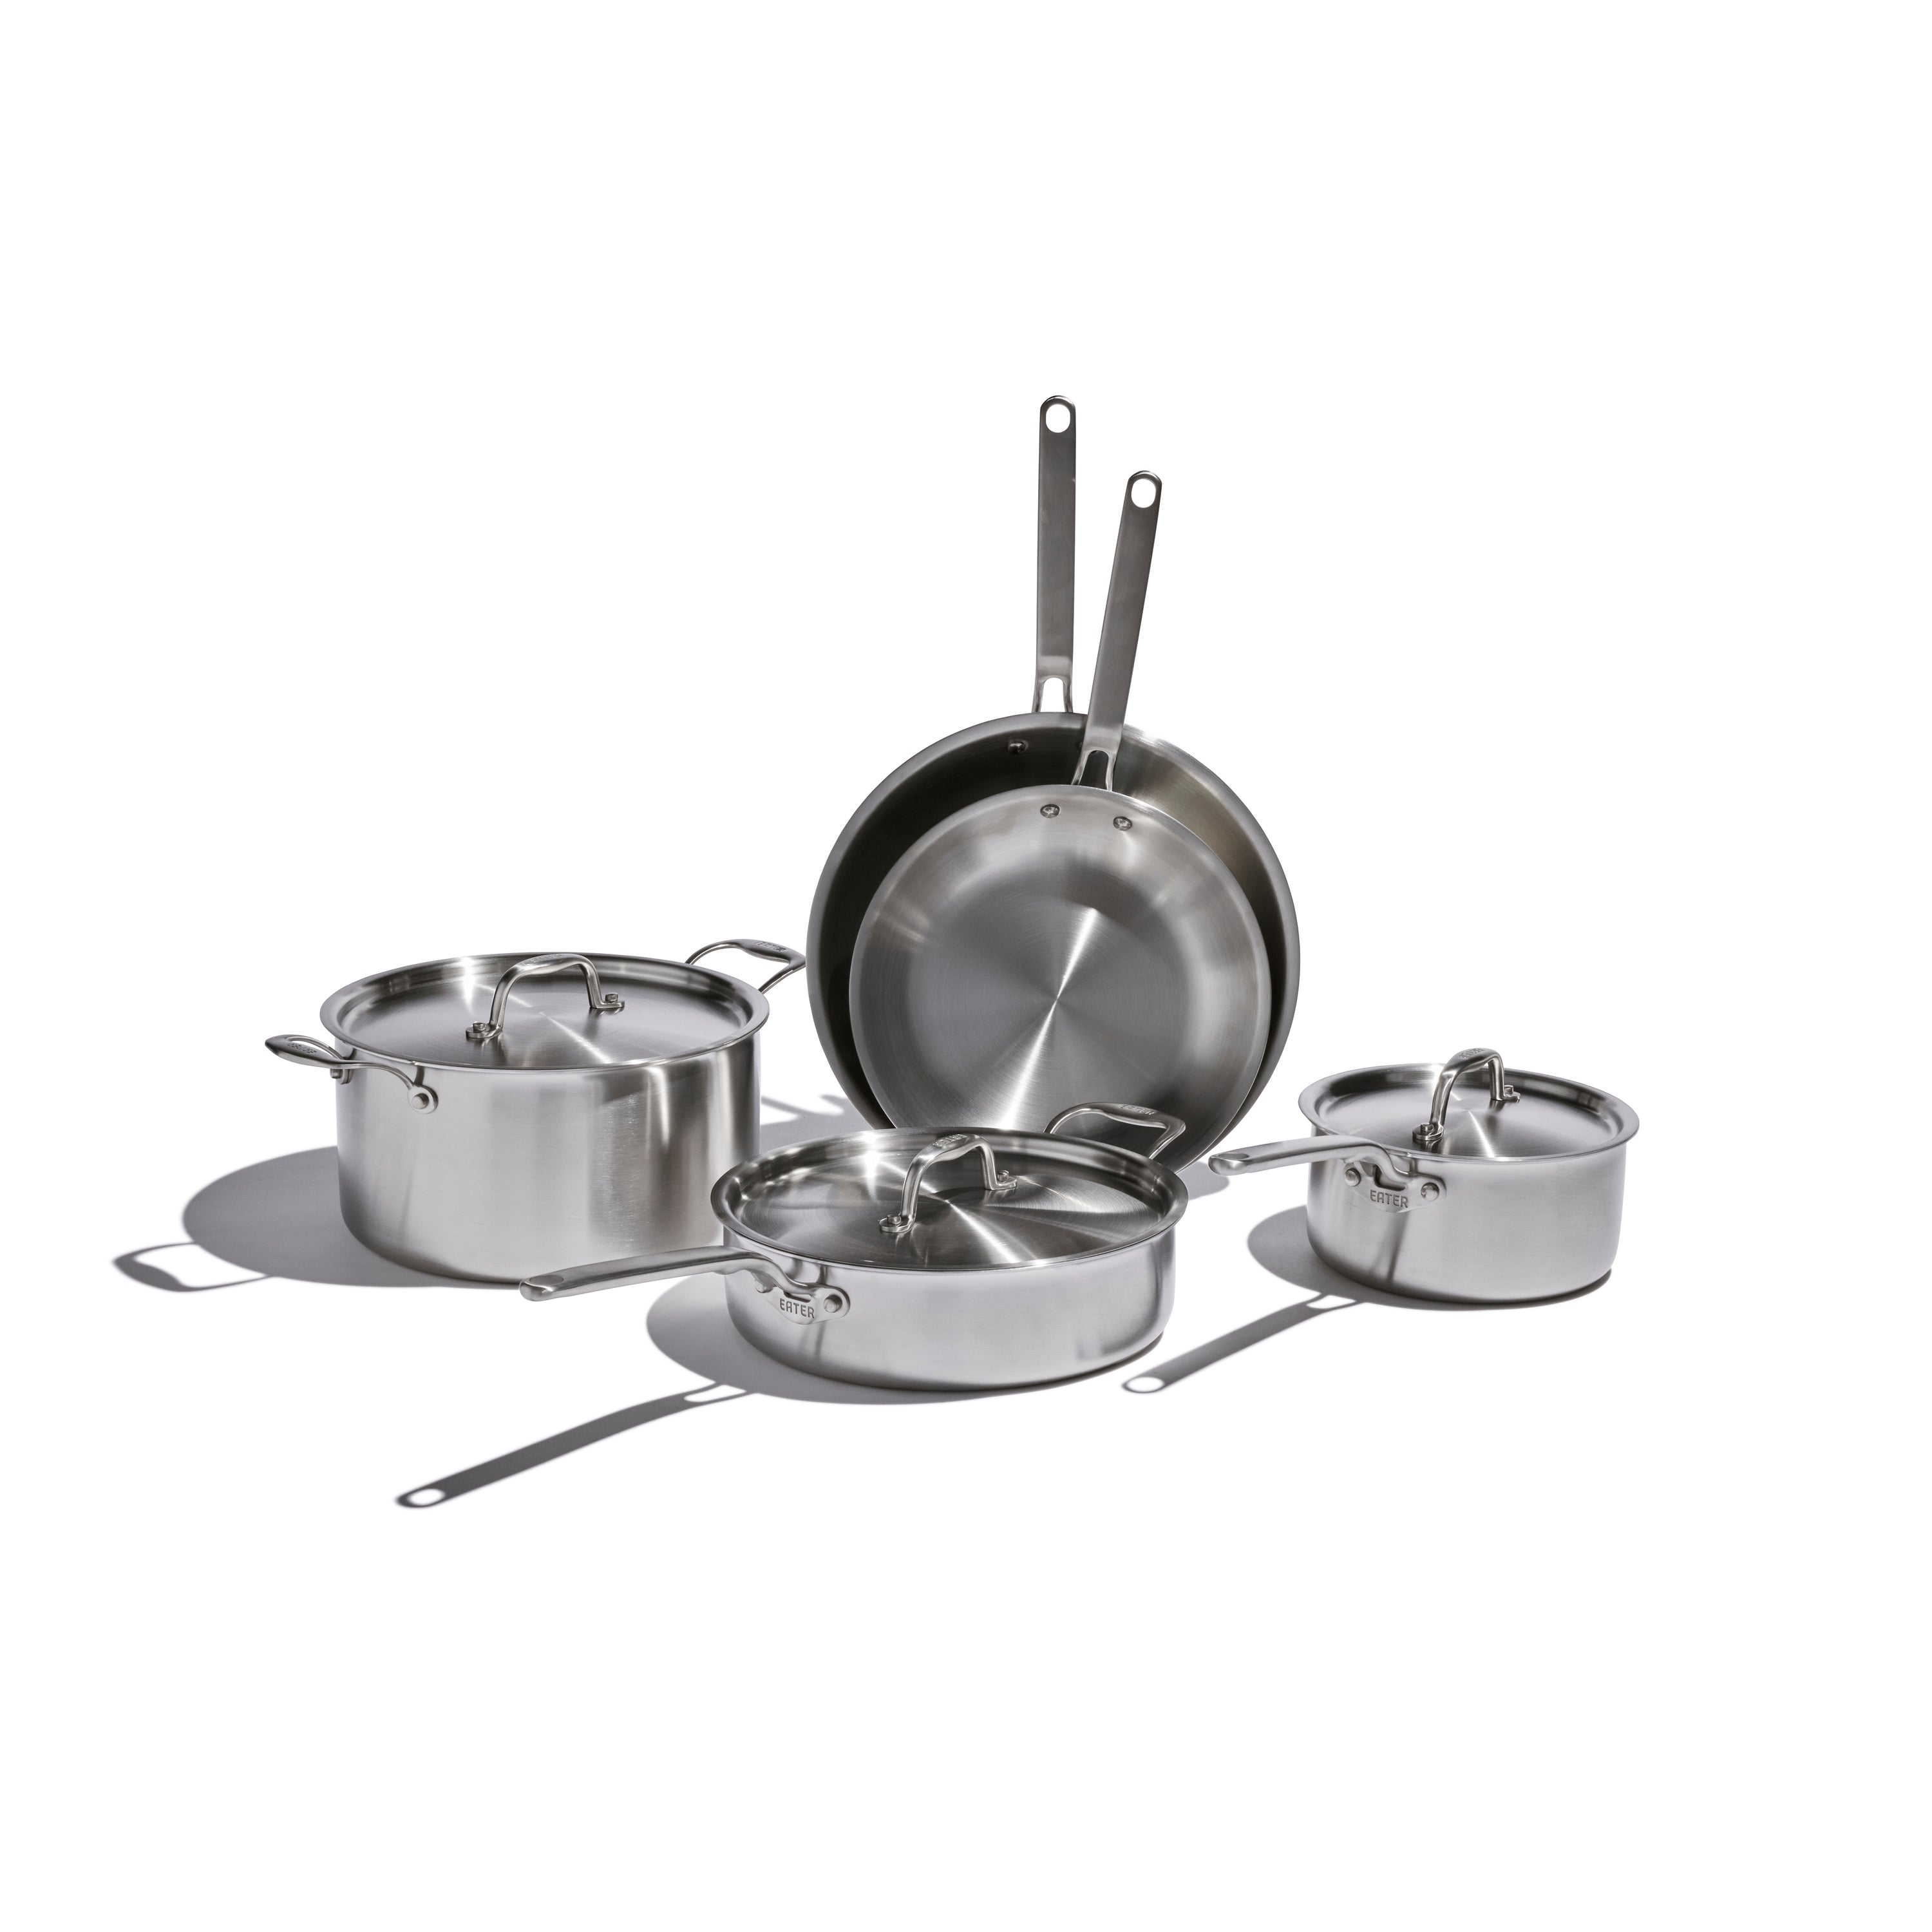 Legend 5 Ply 5 Pc Small Starter Set Stainless Steel Pots & Pans